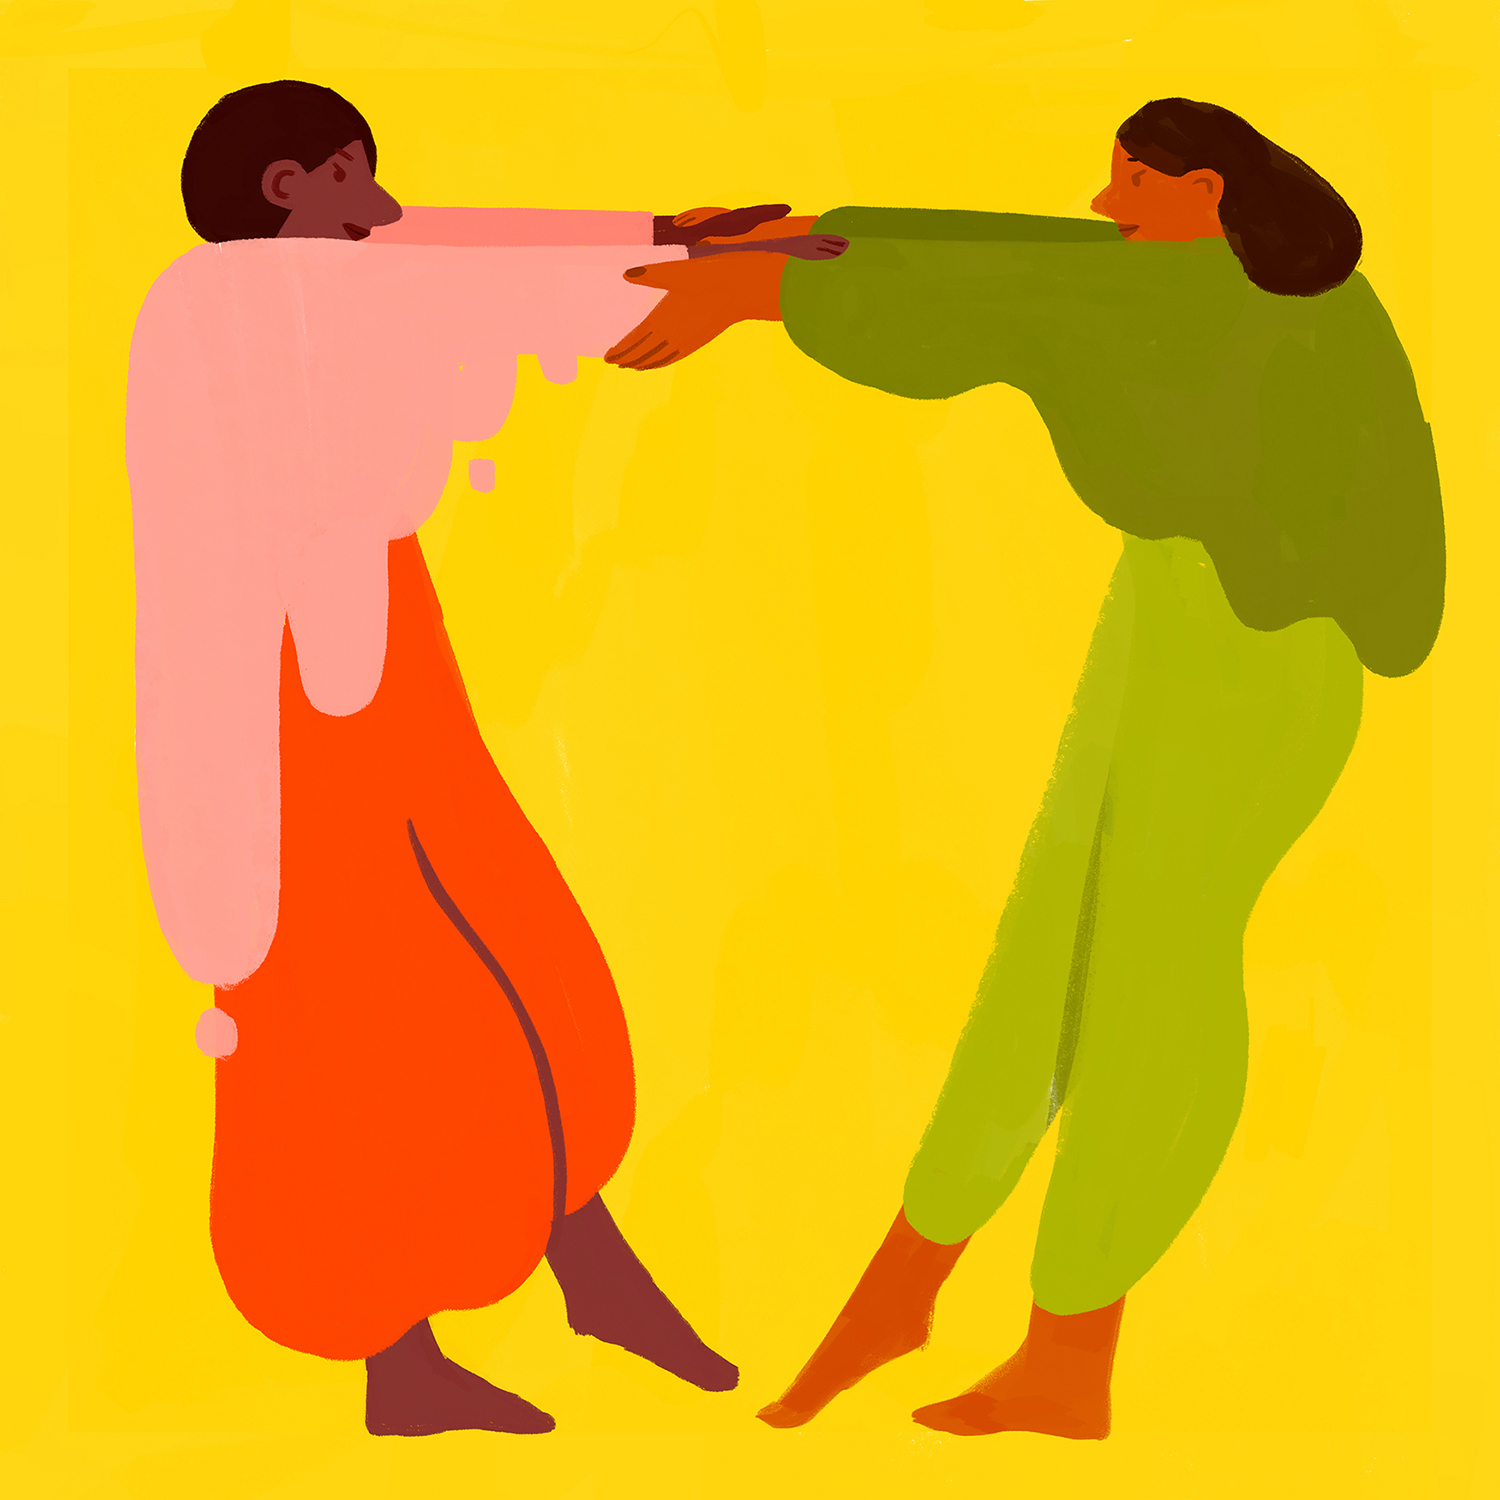 holding-each-other-tight-people-couple-friendship-colorful-yellow-illustration-violeta-noy